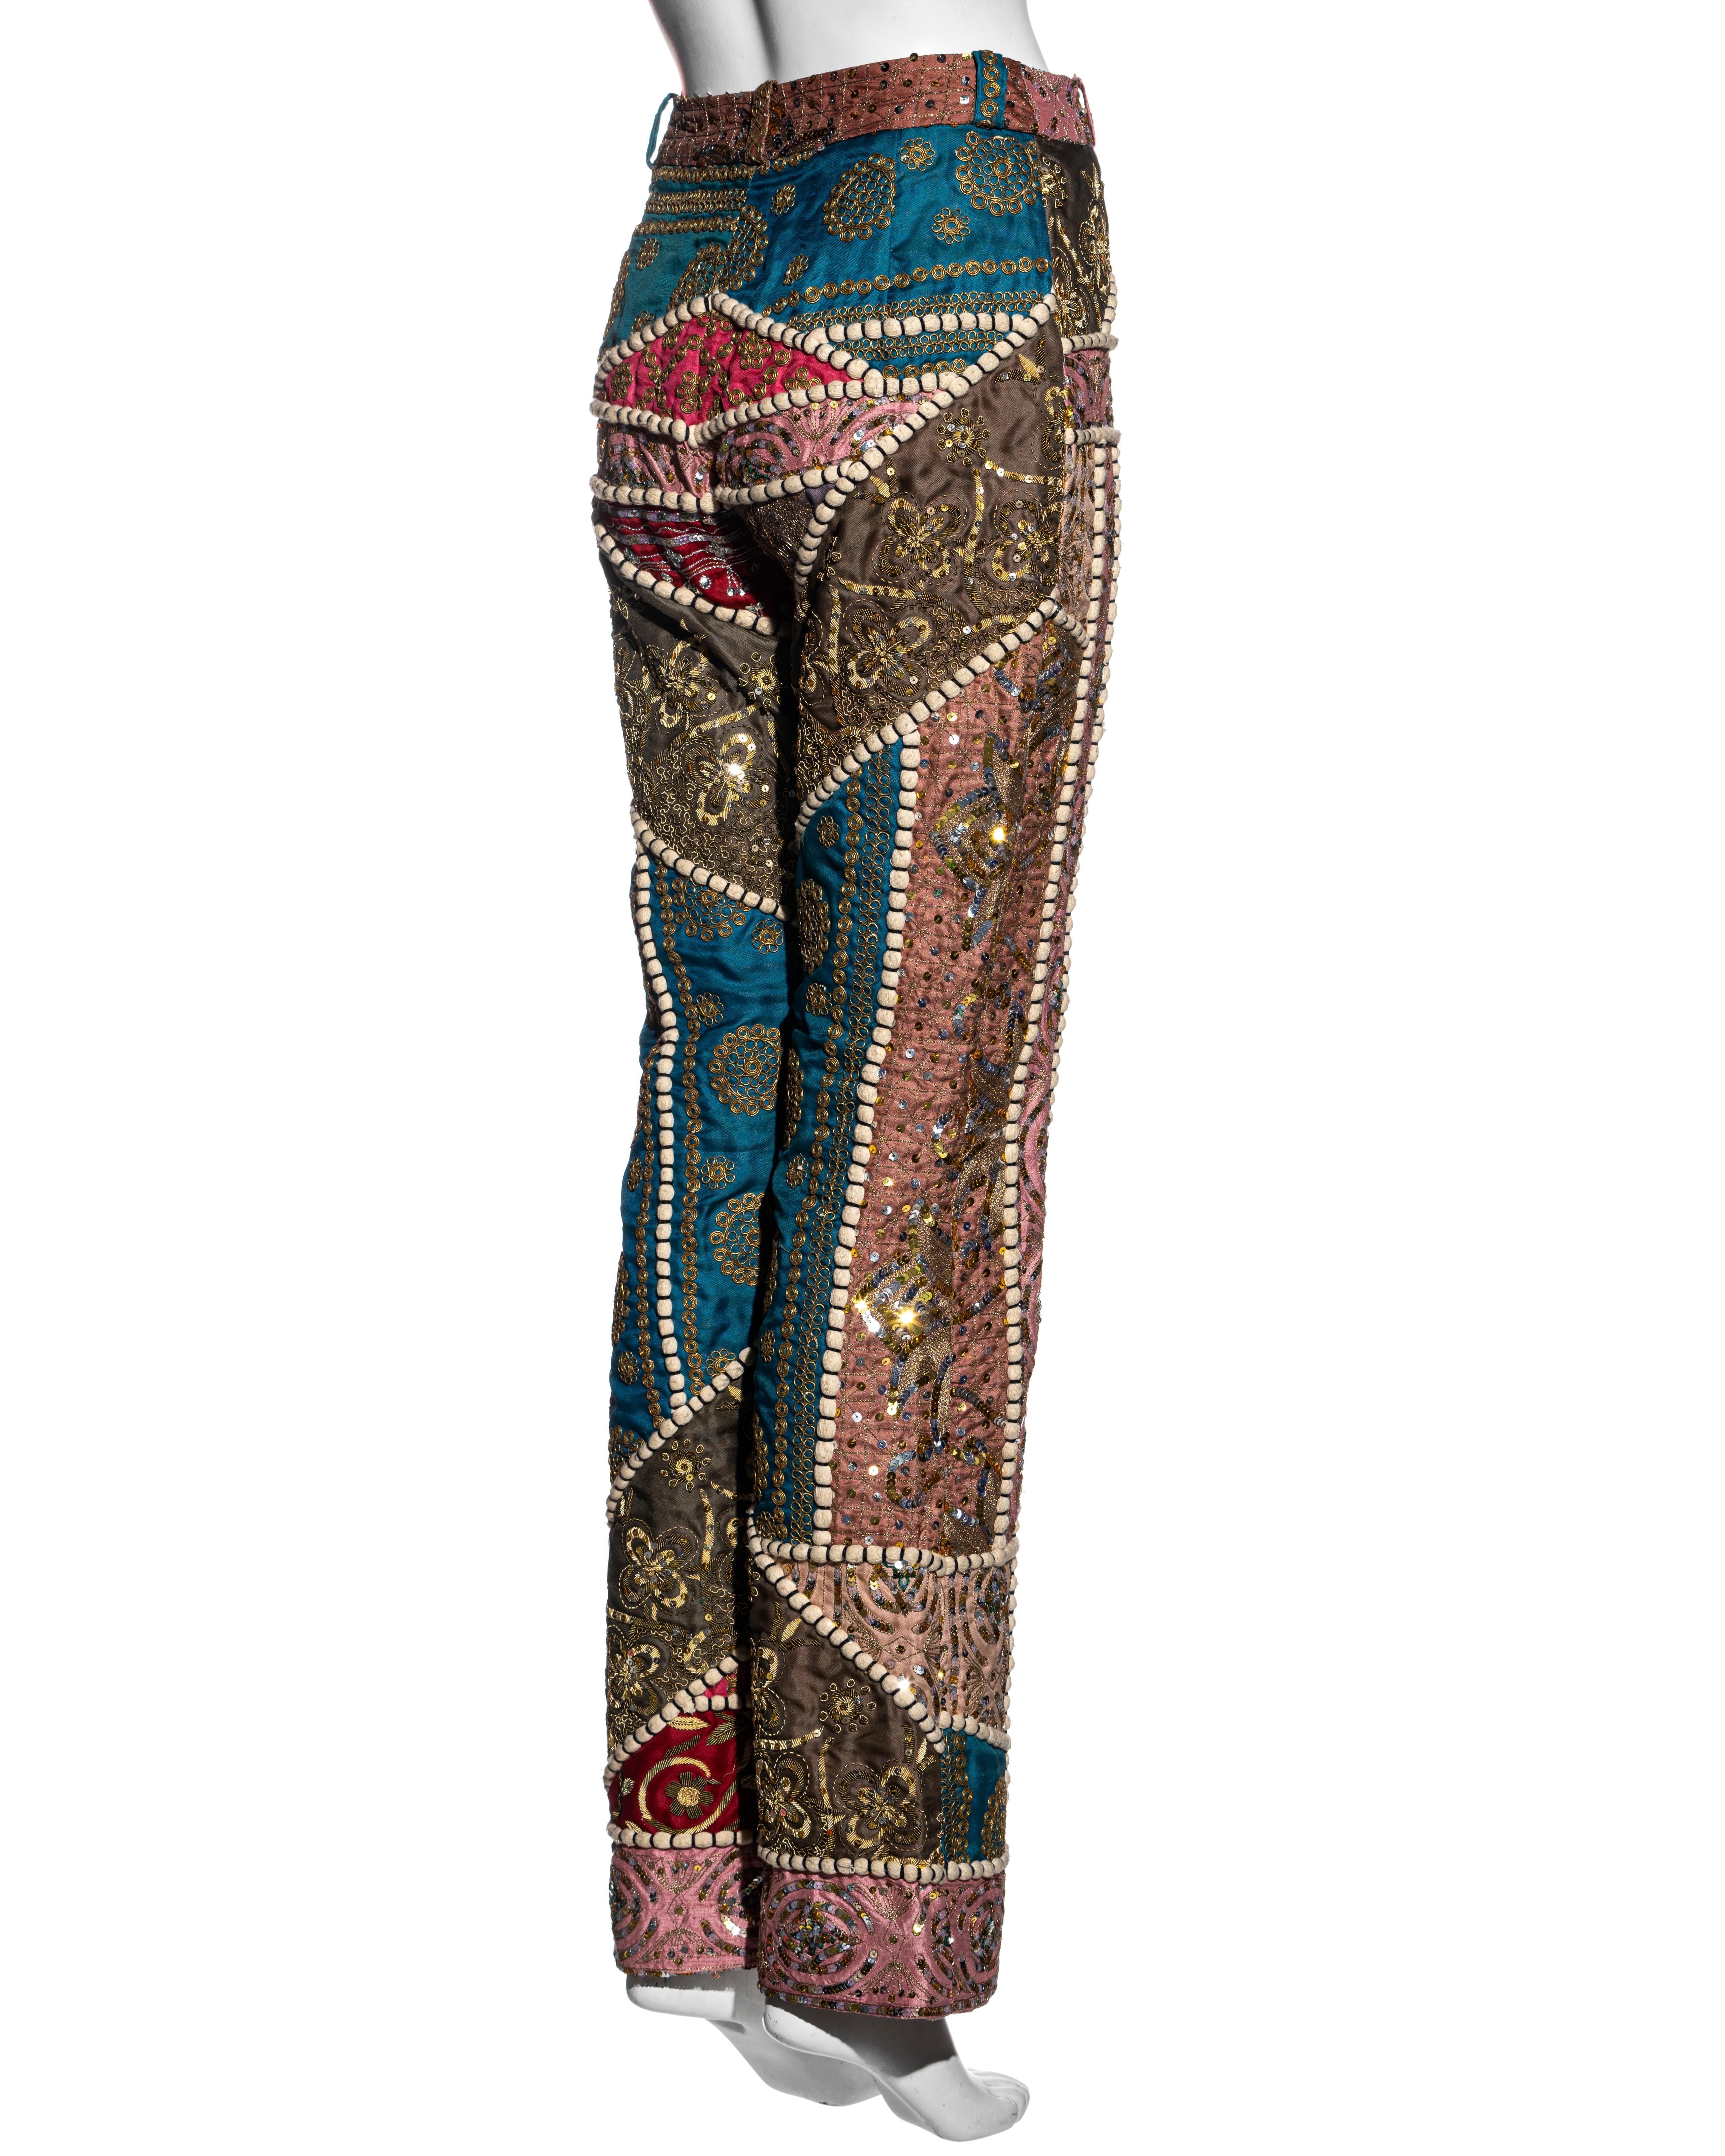 Gianfranco Ferre raw silk patchwork embroidered pants, ss 2002 For Sale 5